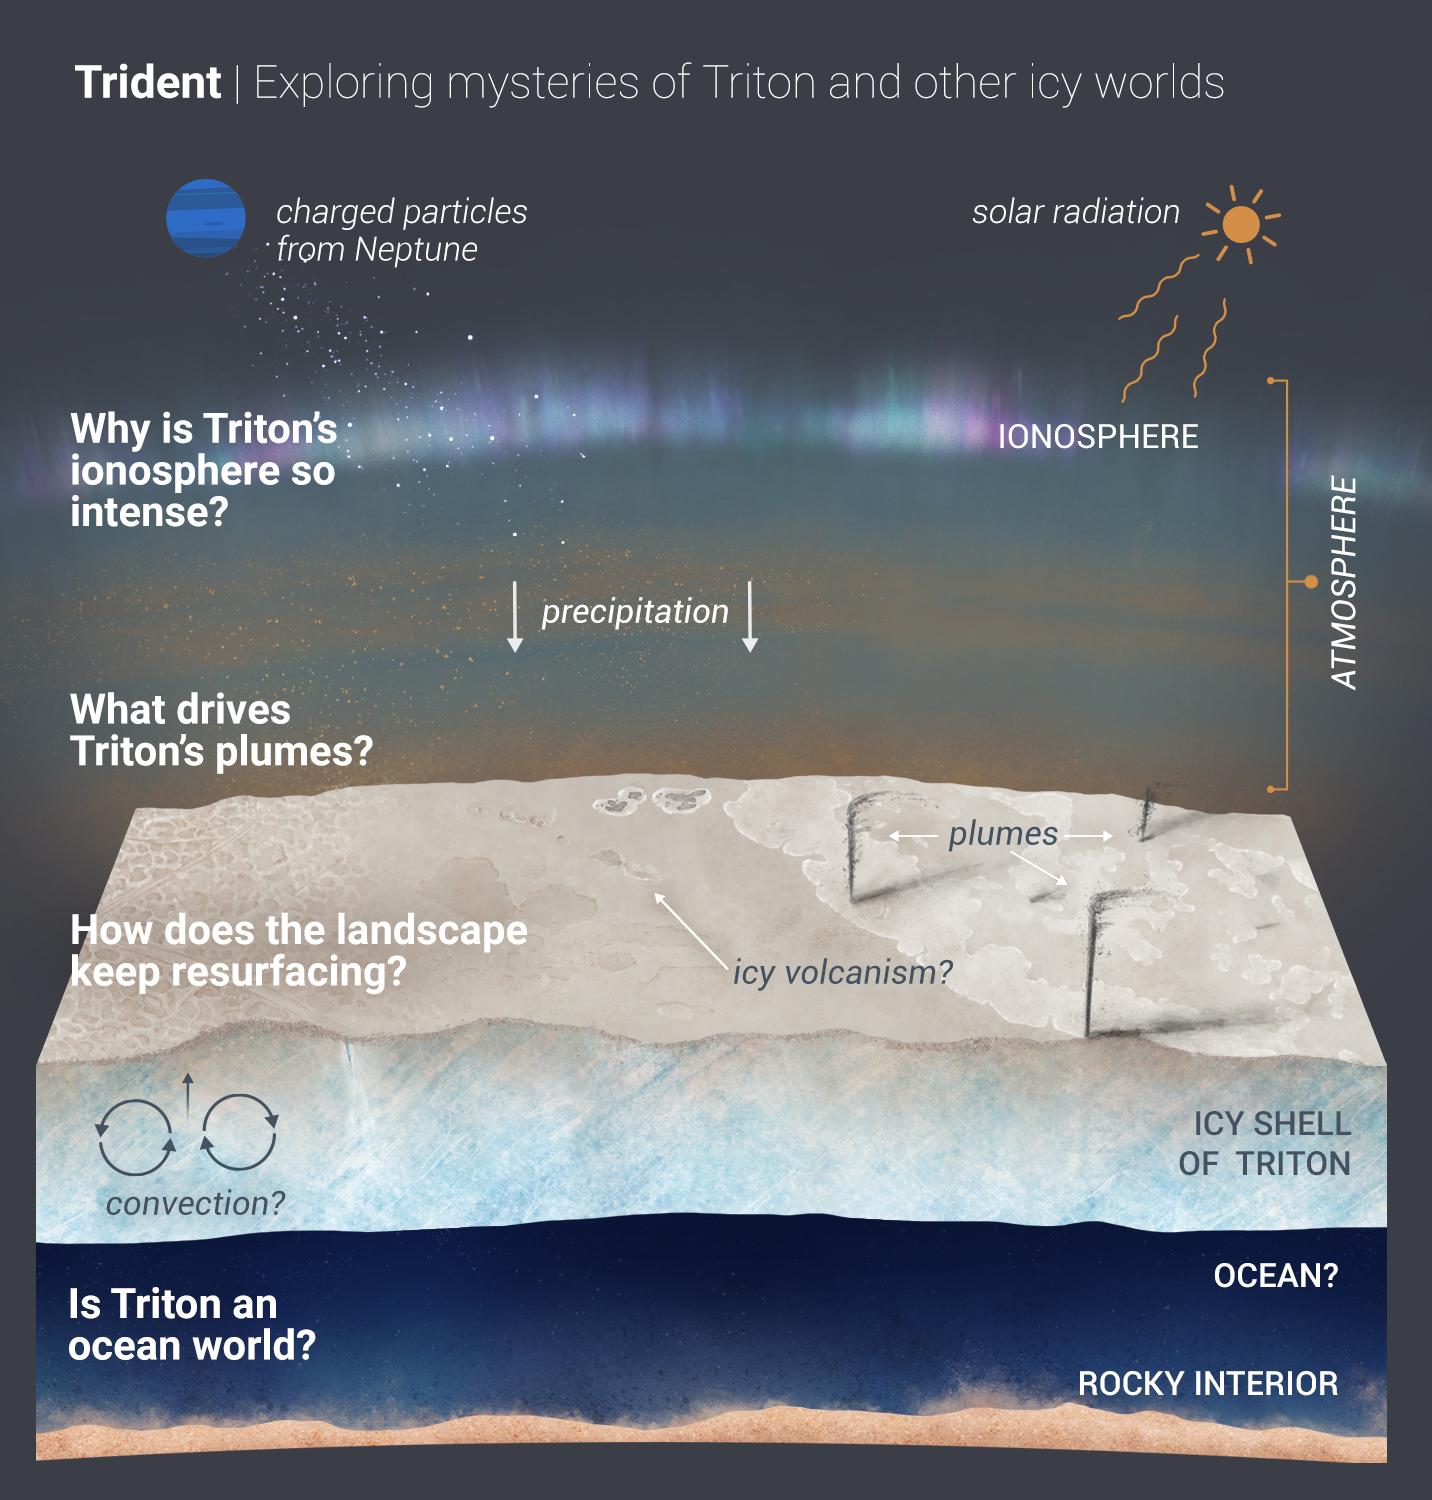 PIA23874: Trident: Exploring the Mysteries of Triton